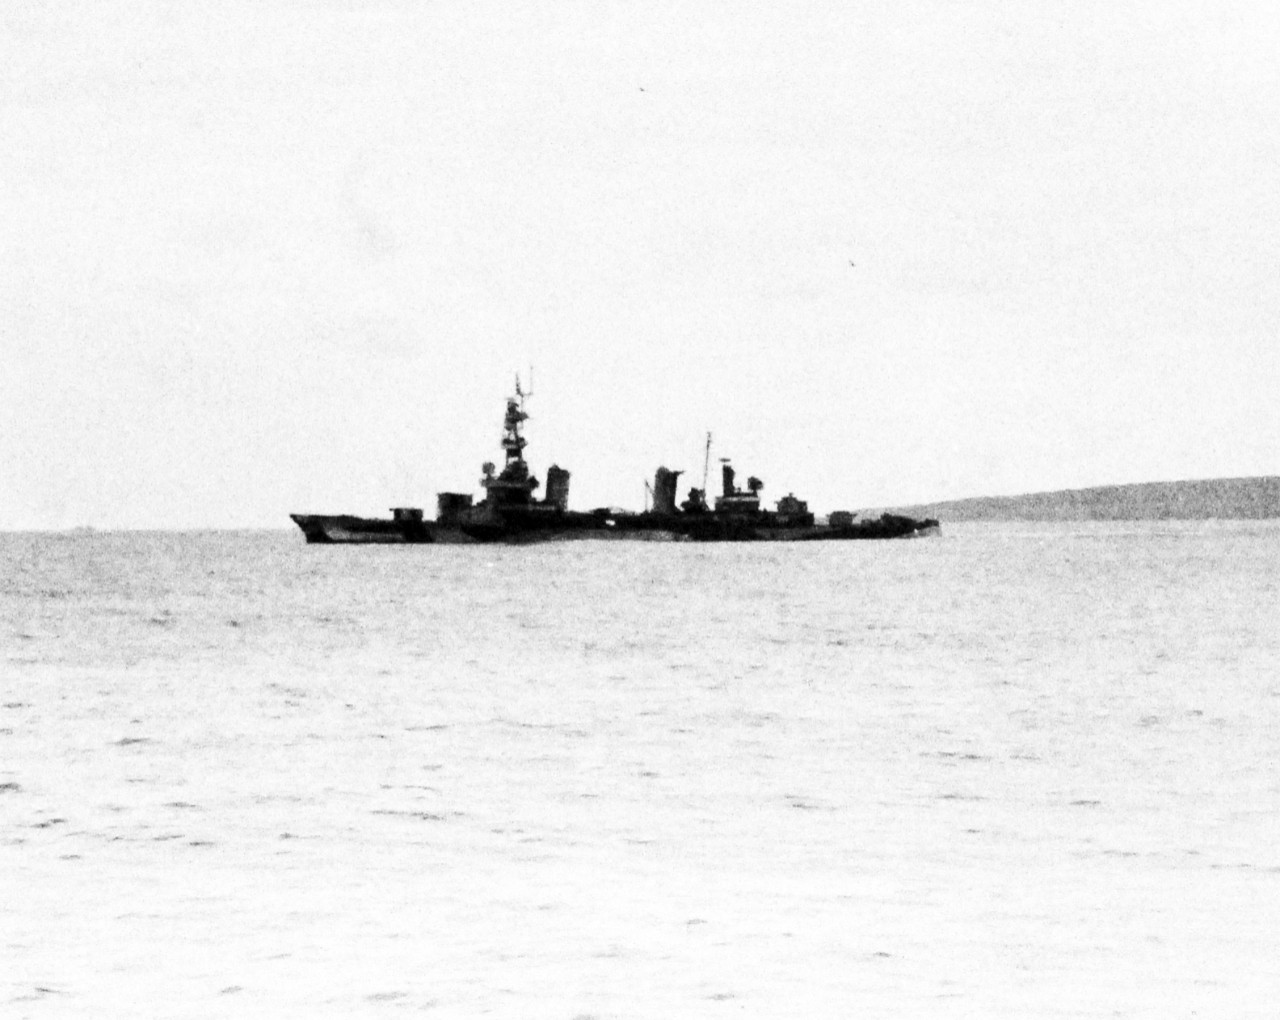 80-G-305000:  Battle for Iwo Jima, February 17, 1945.  USS Pensacola (CA-24) showing damage.  Seen from USS Heywood L. Edwards (DD-663), February 1945. On 17 February, Pensacola took six hits from enemy shore batteries as her guns covered operations of the minesweepers close inshore. Three of her officers and 14 men were killed. Another five officers and 114 men were injured.  Official U.S. Navy photograph, now in the collections of the National Archives.  (2016/09/06).